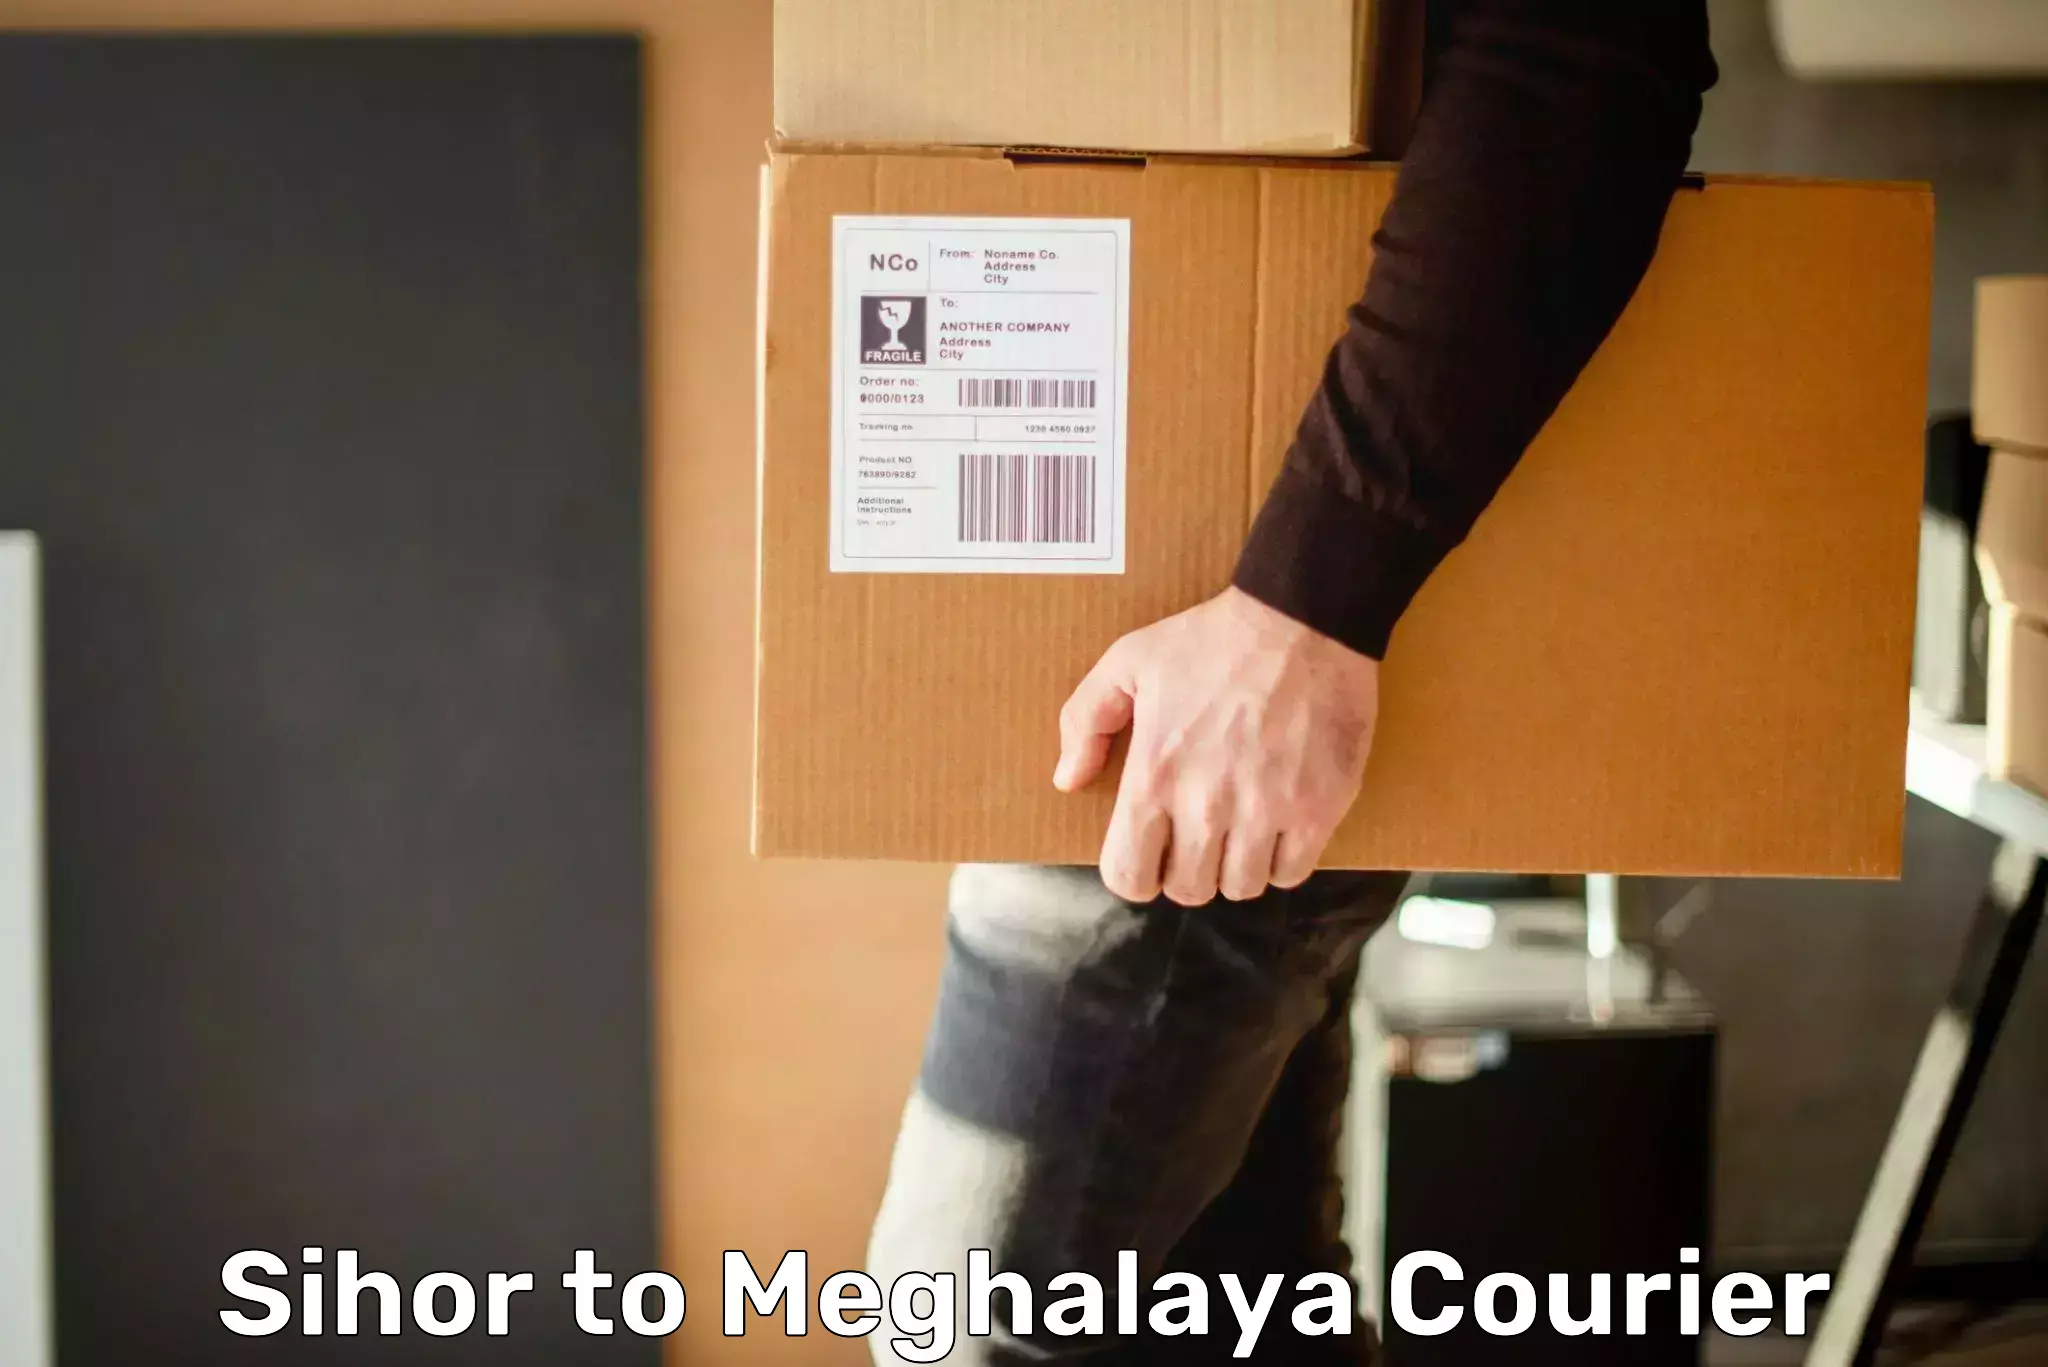 Premium courier solutions in Sihor to Meghalaya